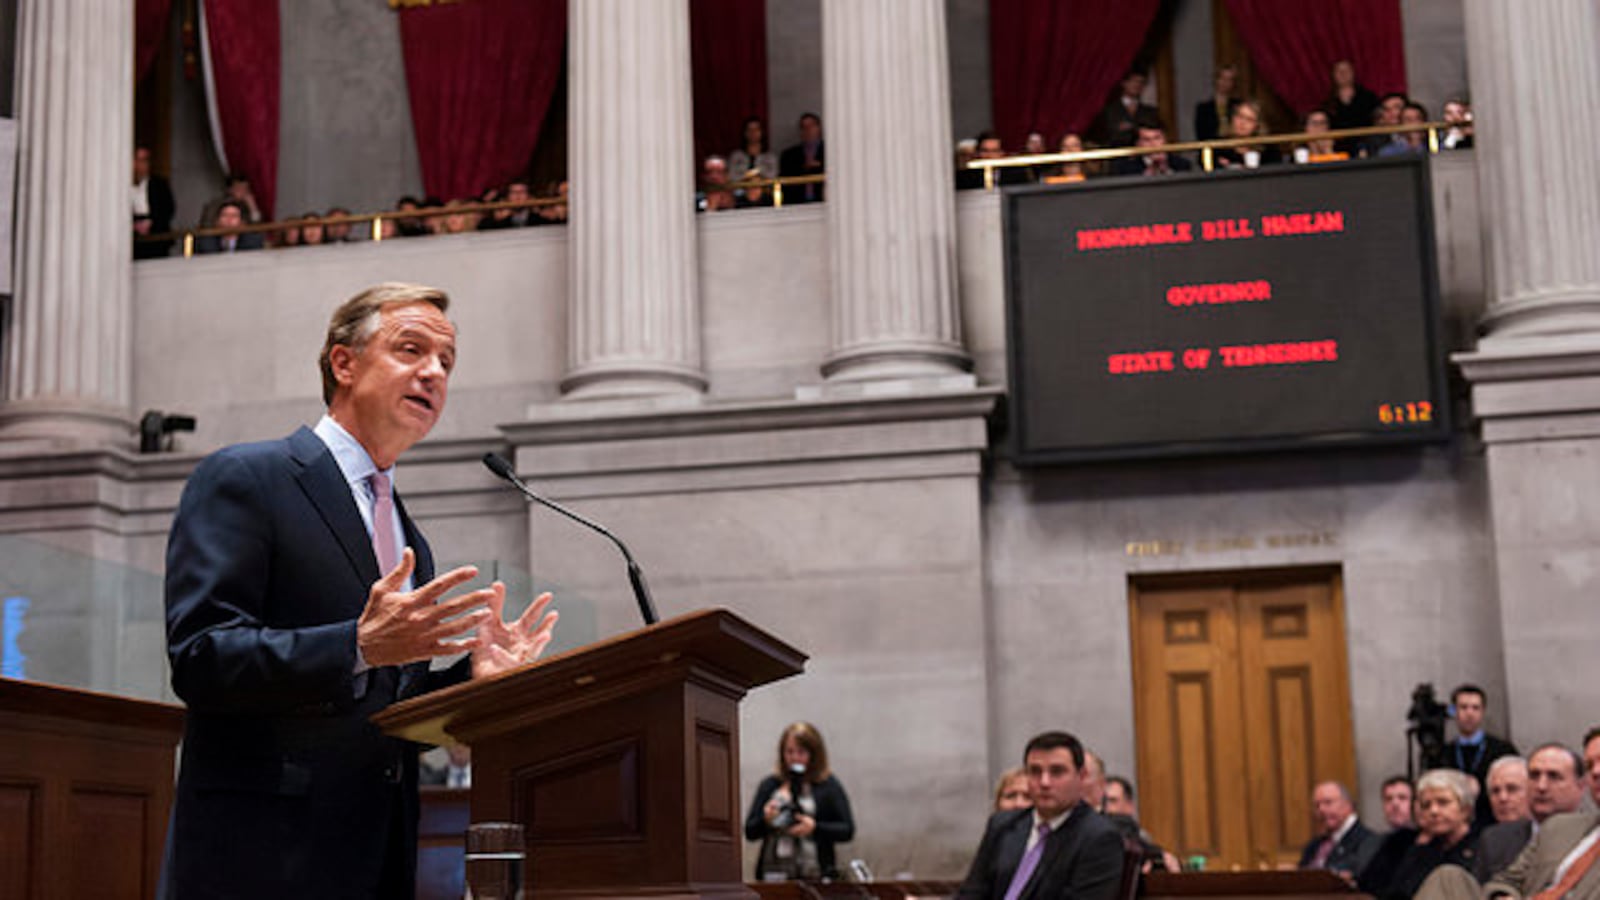 Gov. Bill Haslam addresses lawmakers Feb. 2 during a special session of the Tennessee General Assembly. The governor delivered his State of the State address on Feb. 9.